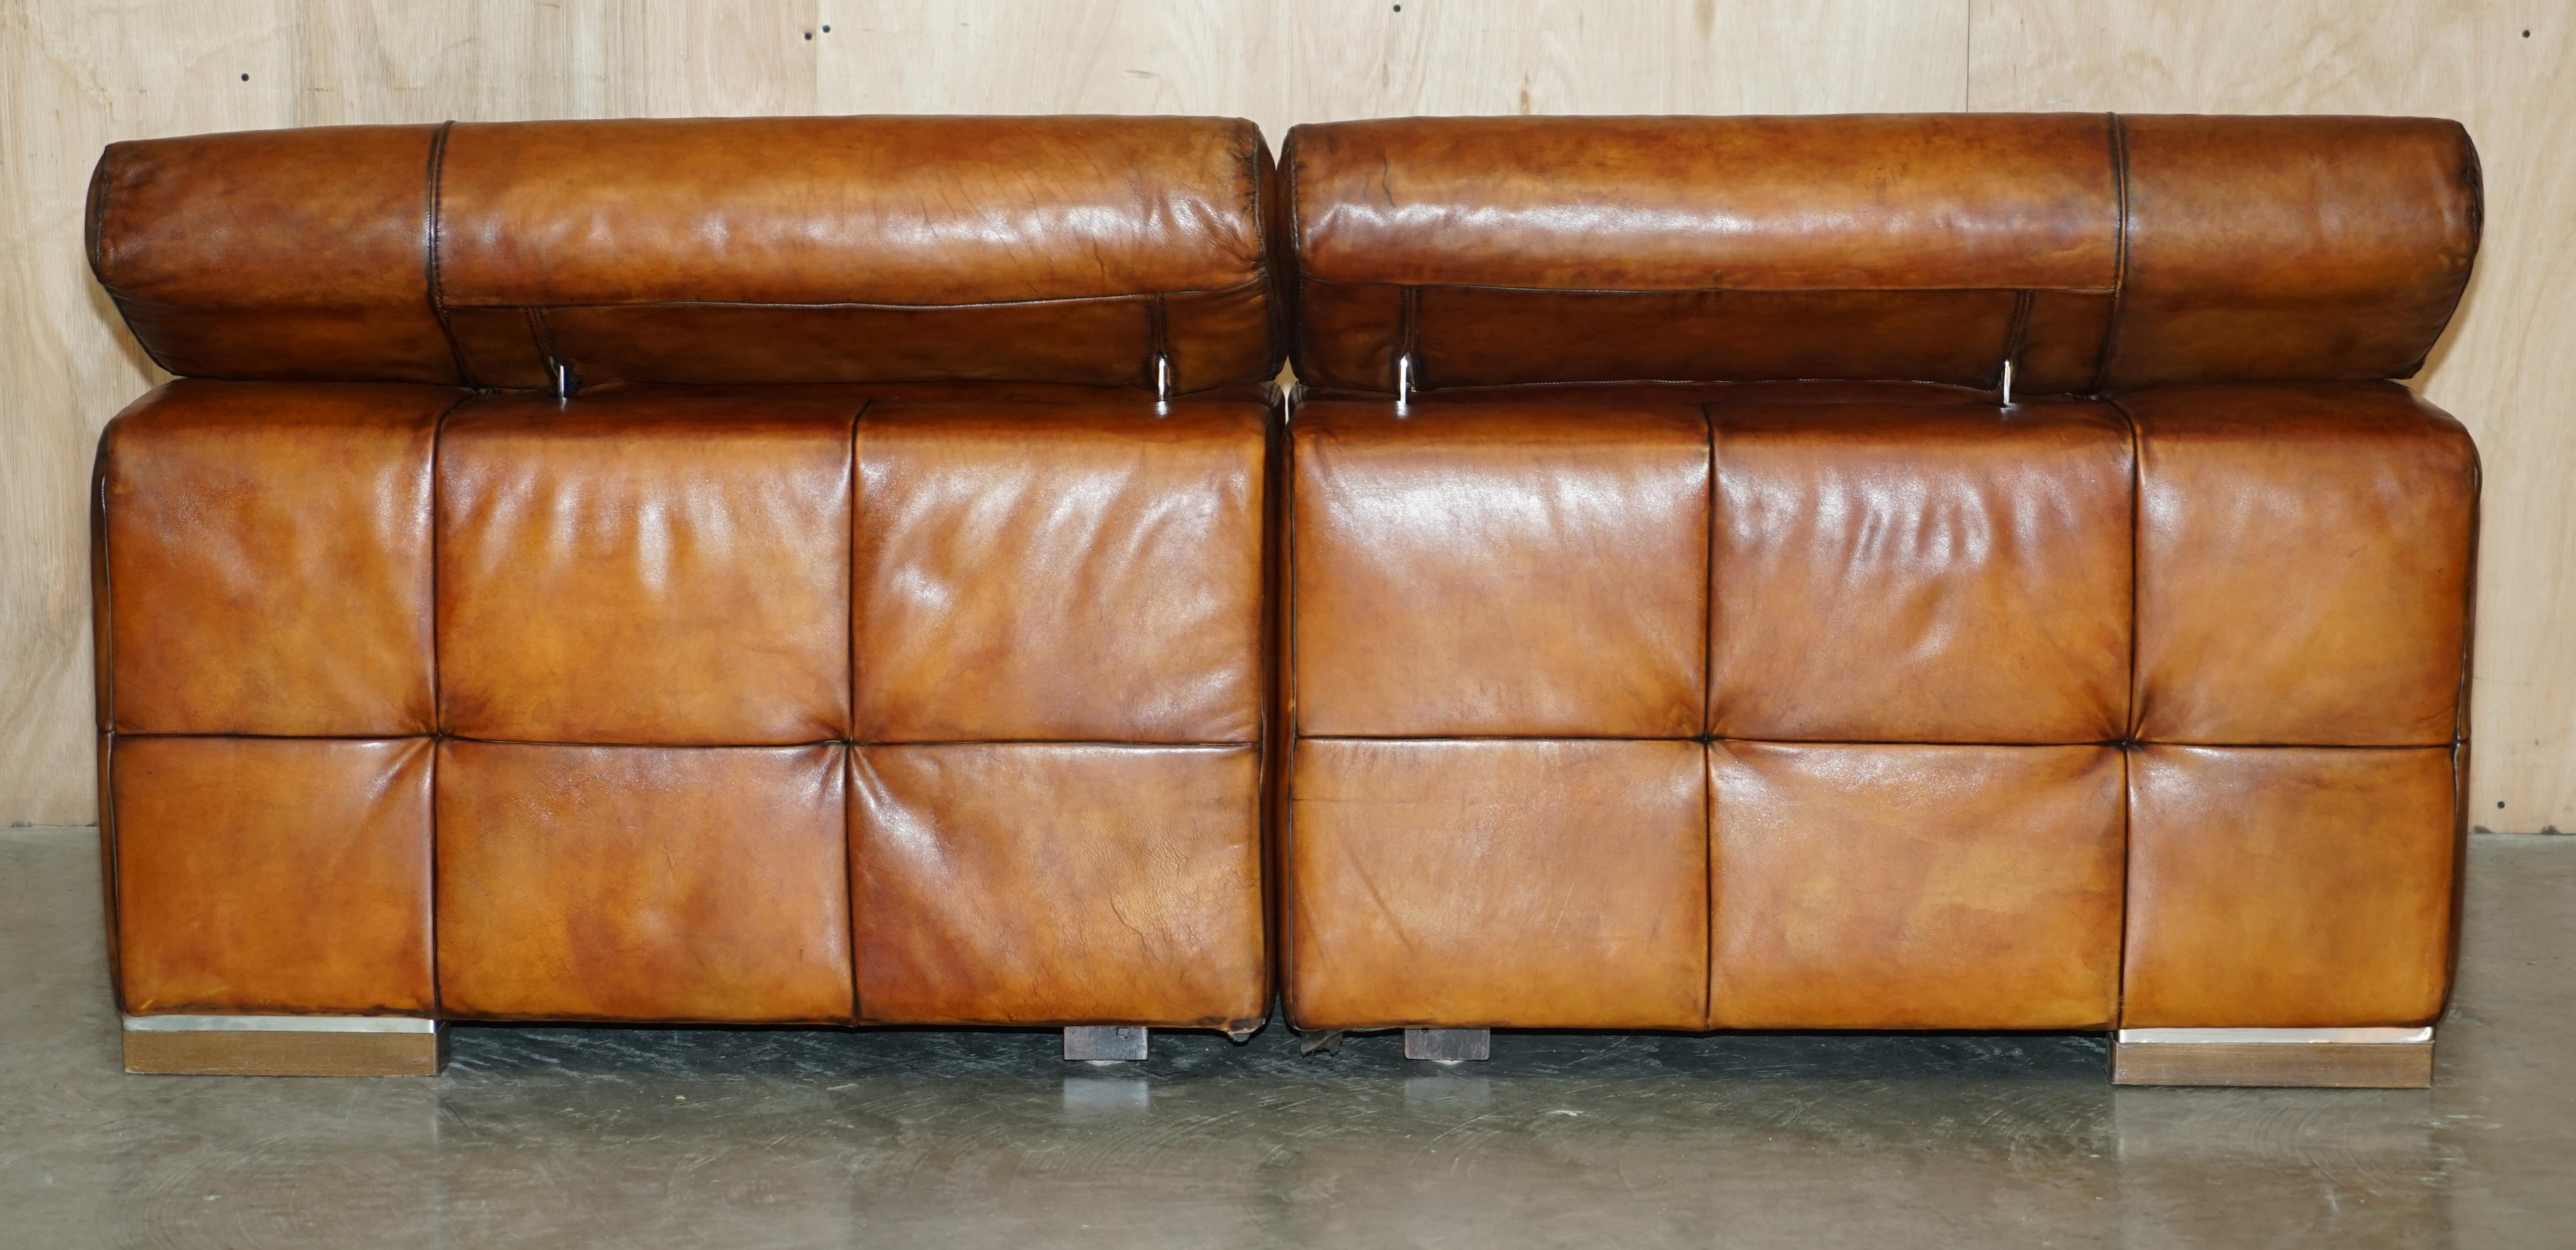 Natuzzi Roma Hand Dyed Cigar Brown Leather Sofa Raising Headrest Part of a Suite For Sale 8